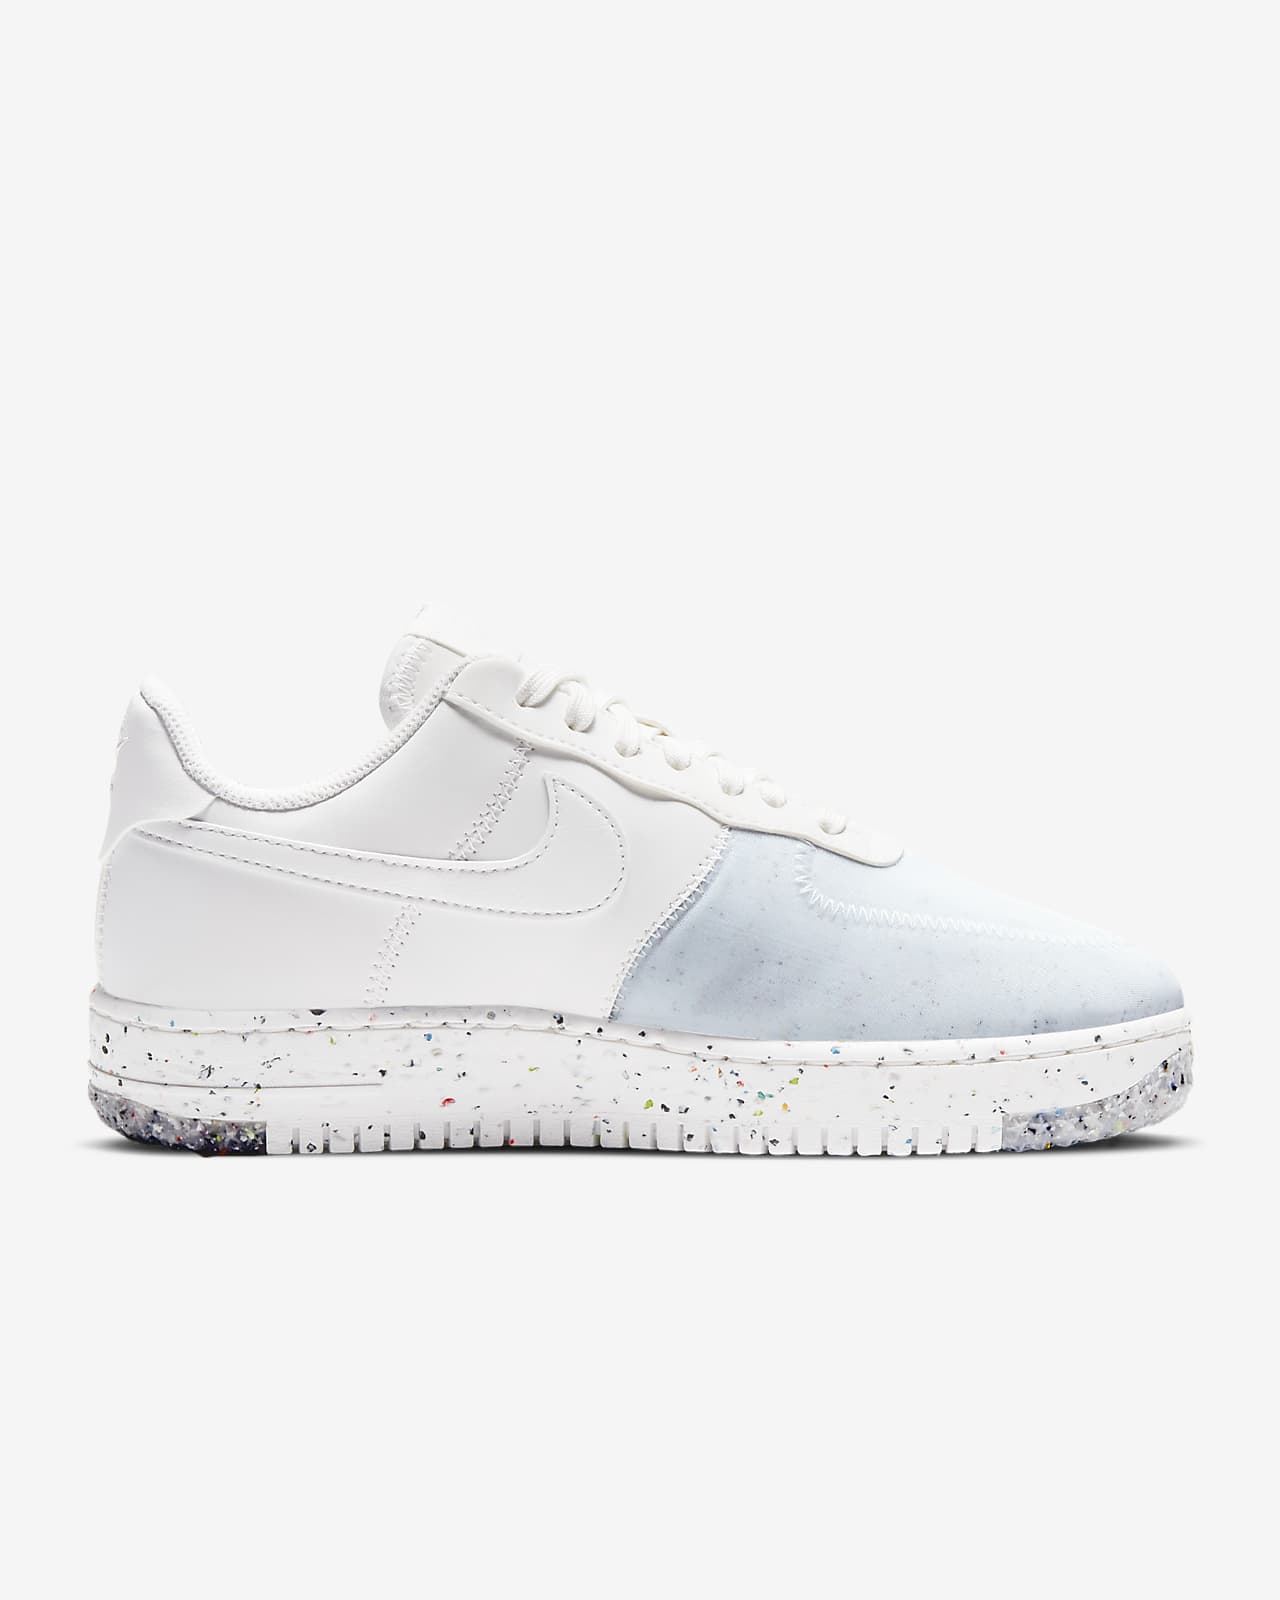 nike air force 1 crater grind white